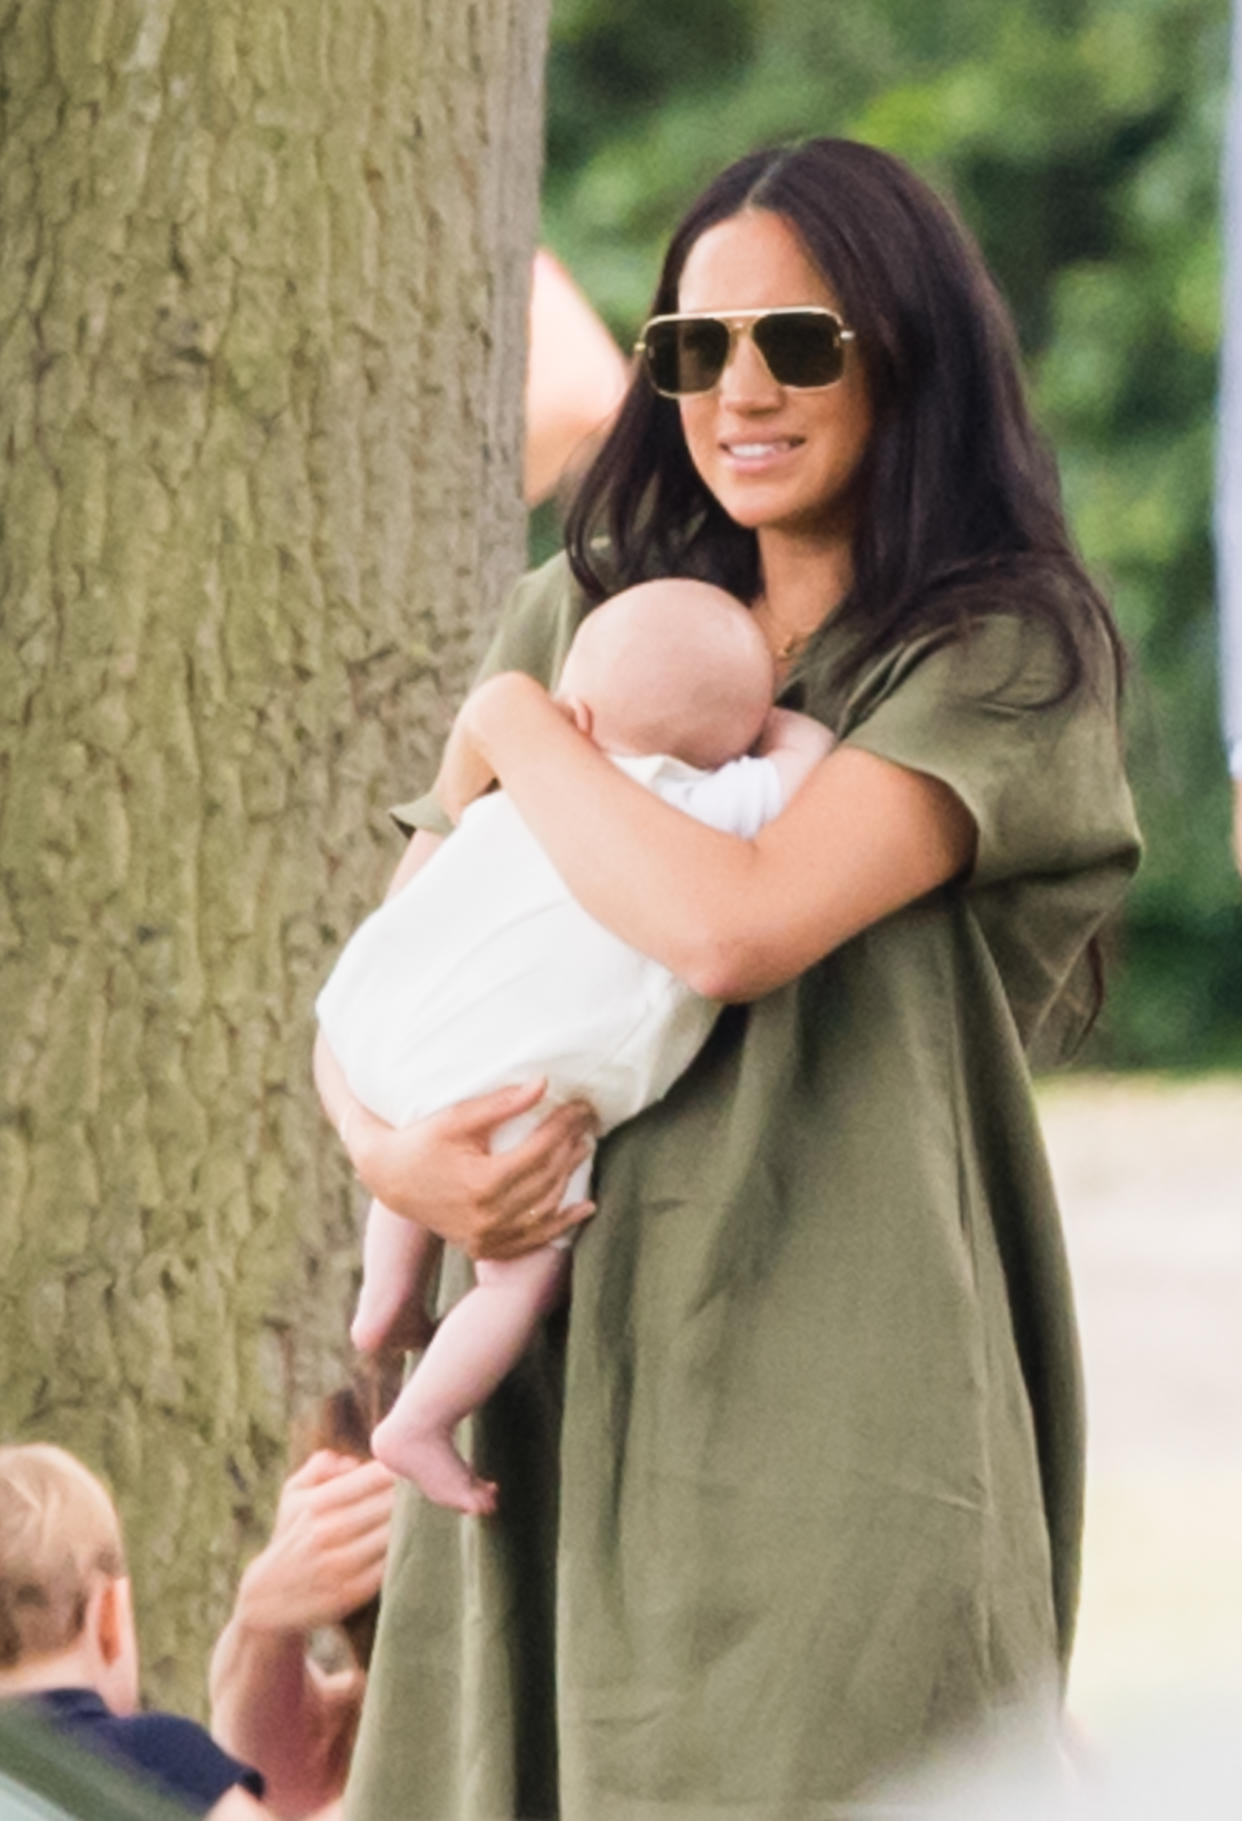 WOKINGHAM, ENGLAND - JULY 10: Meghan, Duchess of Sussex and Archie Harrison Mountbatten-Windsor attend The King Power Royal Charity Polo Day at Billingbear Polo Club on July 10, 2019 in Wokingham, England. (Photo by Samir Hussein/WireImage)